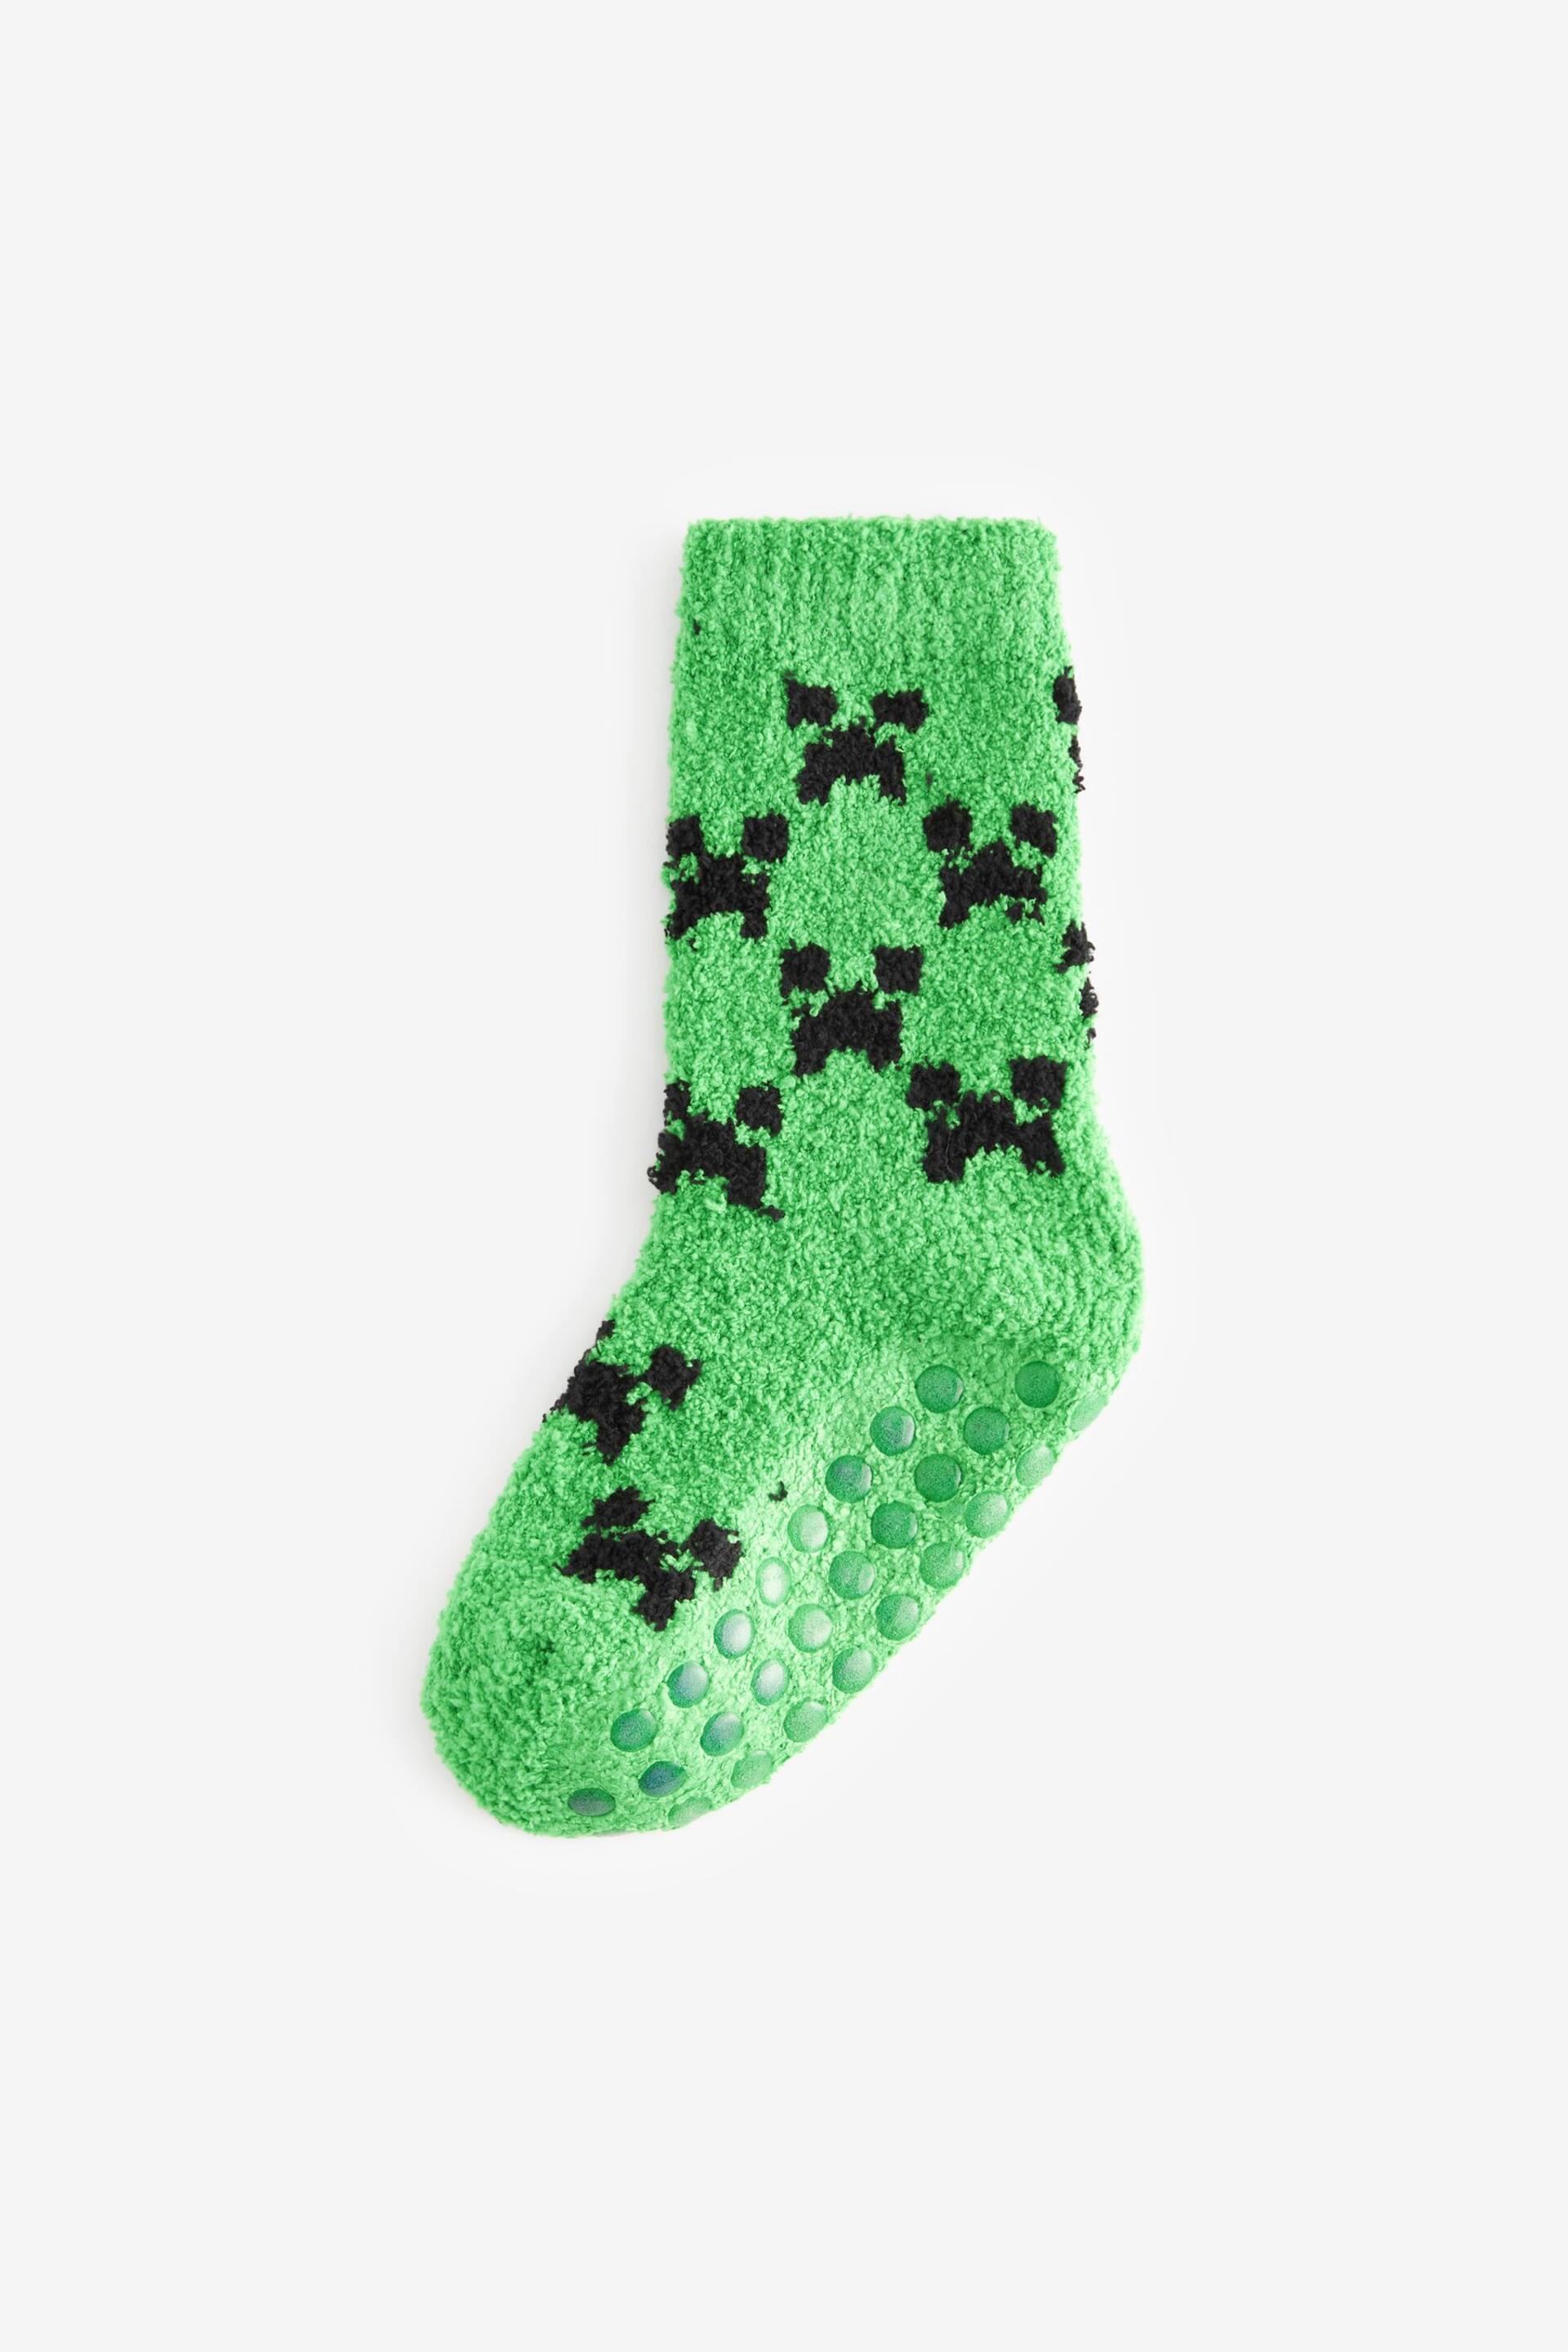 Minecraft Cosy Socks 2 Pack - Image 2 of 3